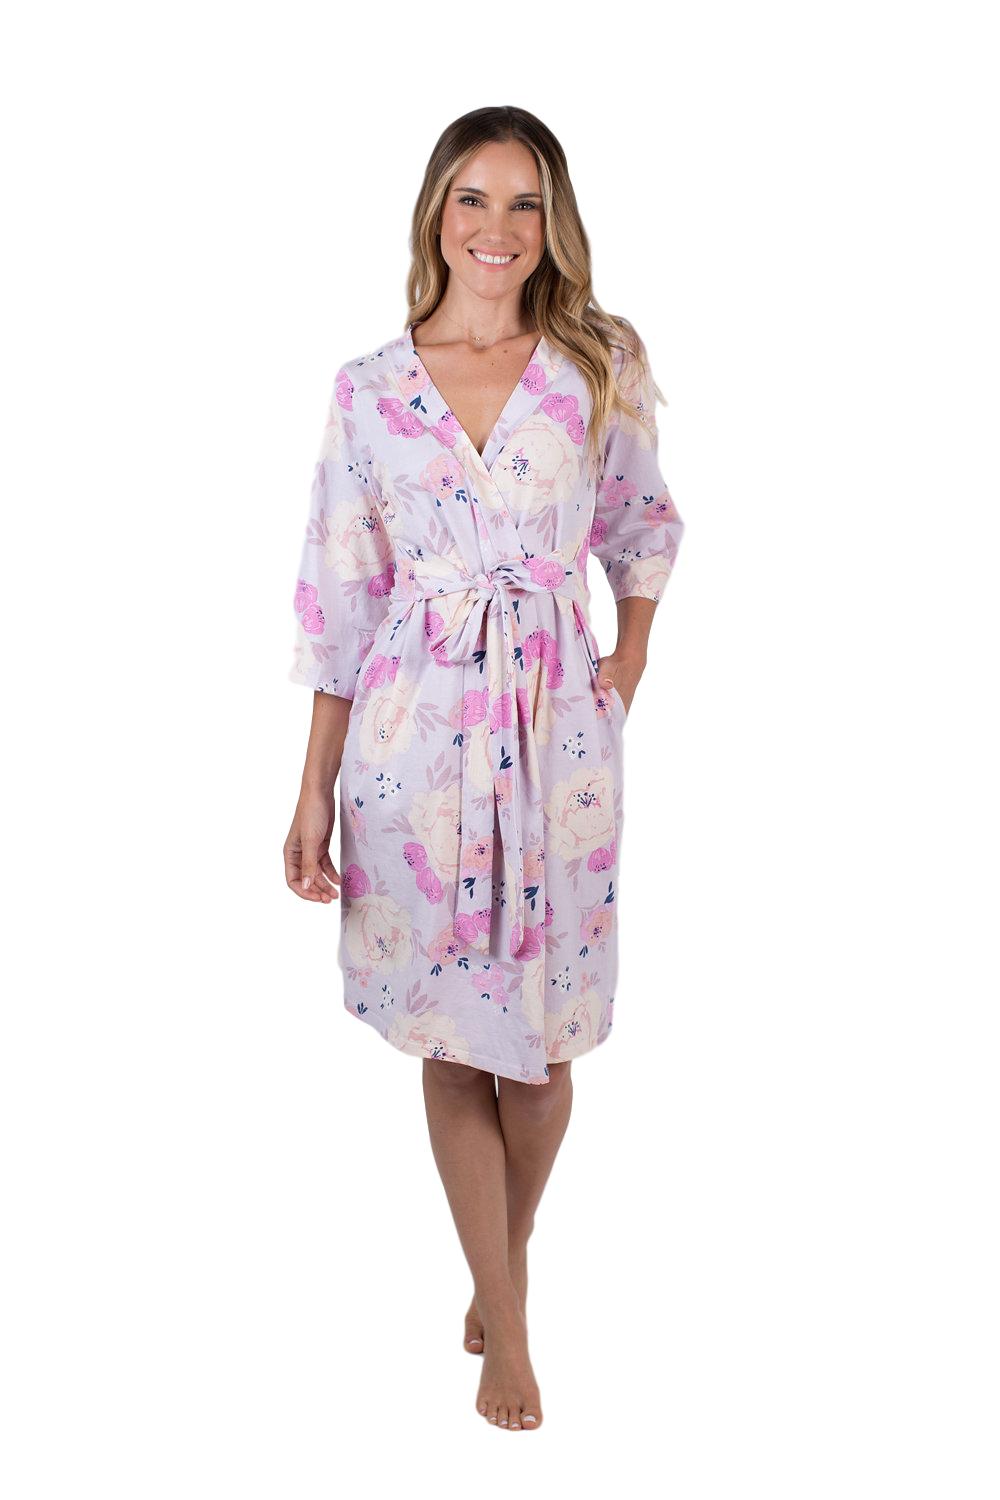 Purple, pink, and cream flowered print. Anais is the print for you! Pack your hospital bag or give the perfect gift for mom with this hospital robe. 3/4 sleeve length for easy IV access, belt tie for comfortable closure, and knee length for full coverage.